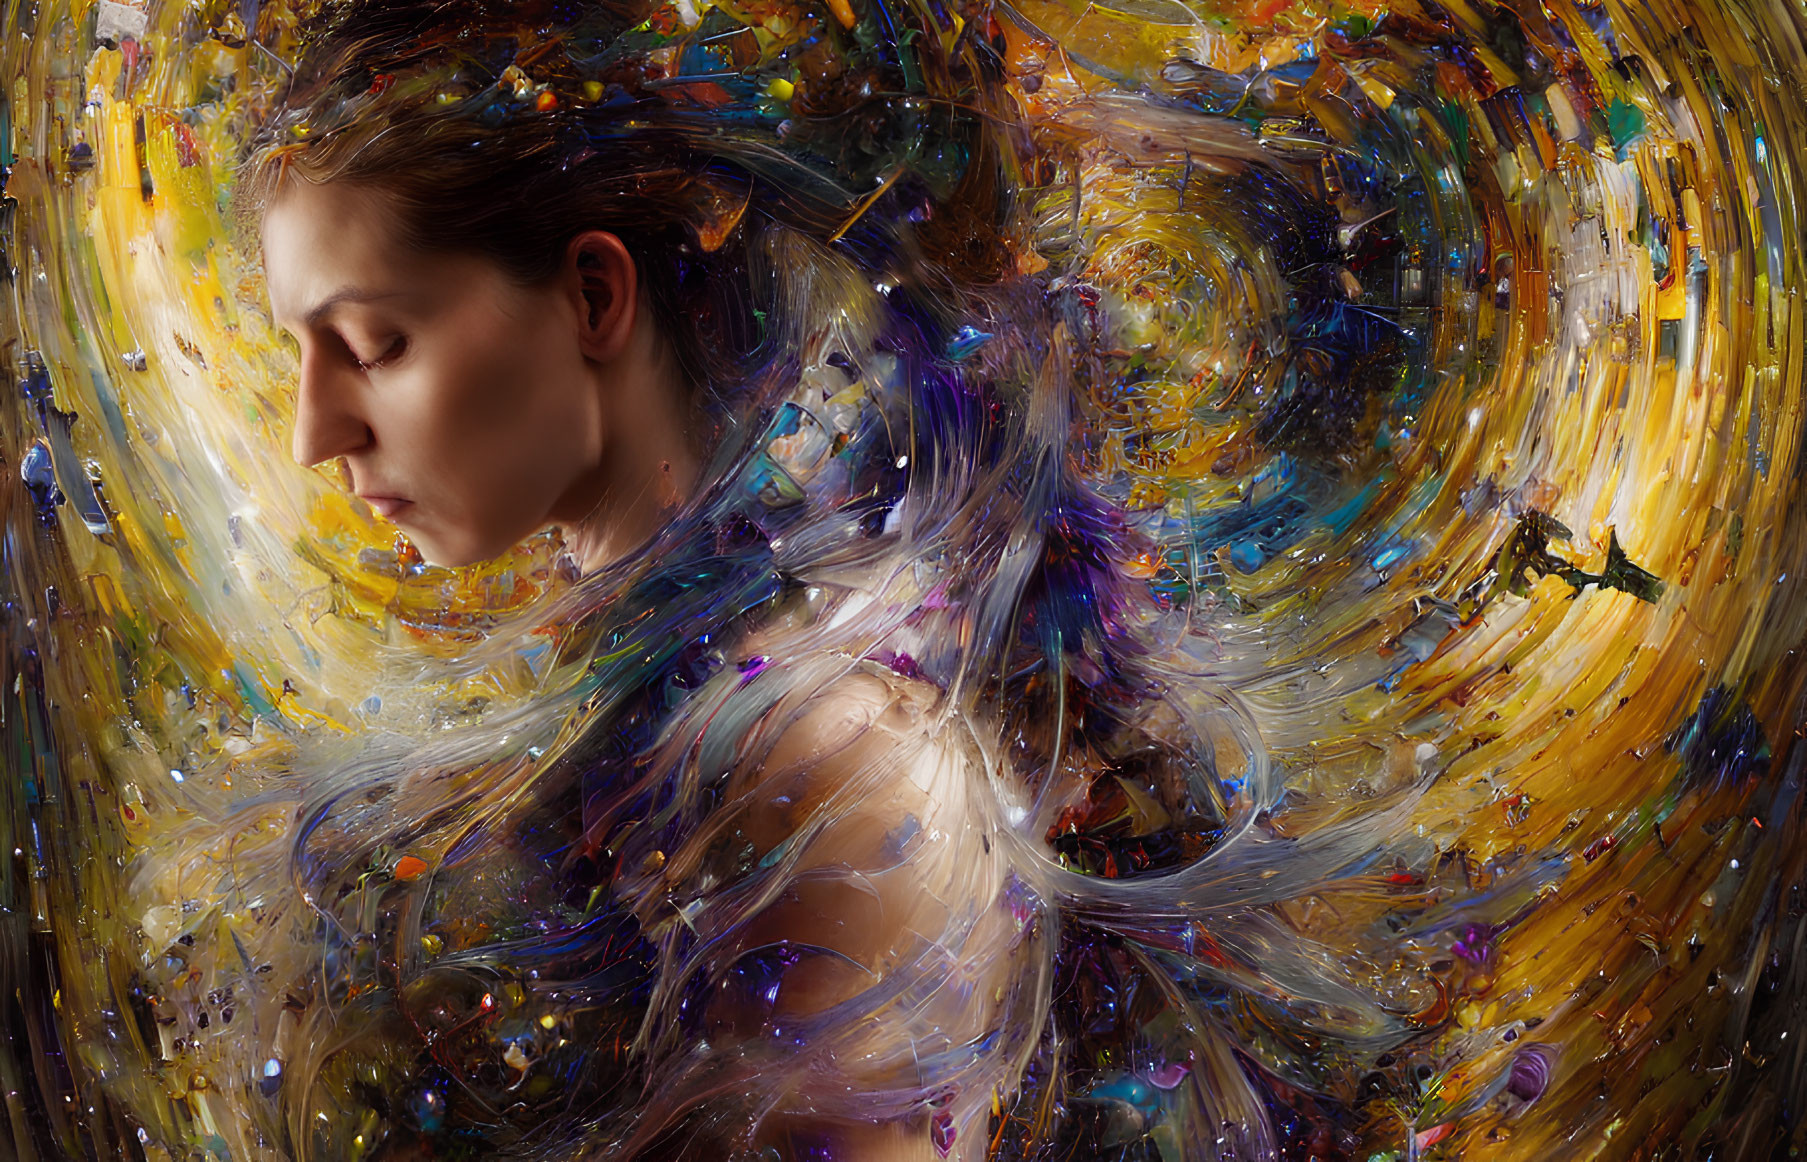 Vibrant cosmic swirl of colors surrounding a woman